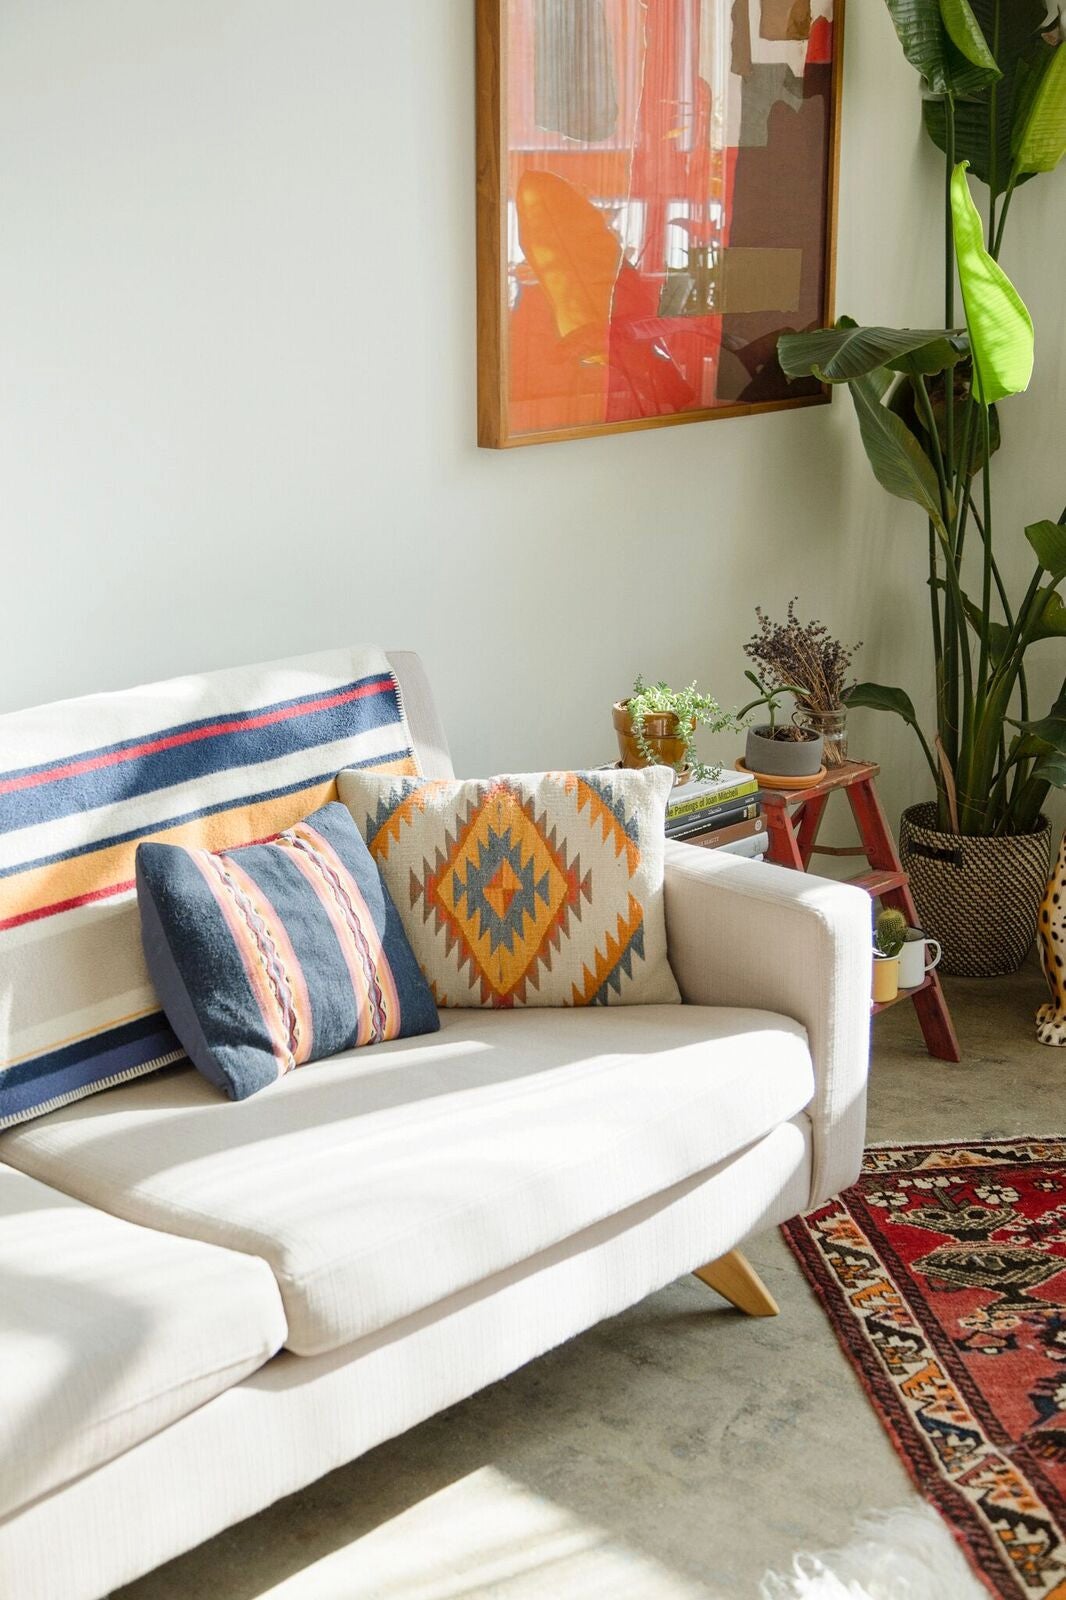 This Colorful, Eclectic Home Used to Be a Factory